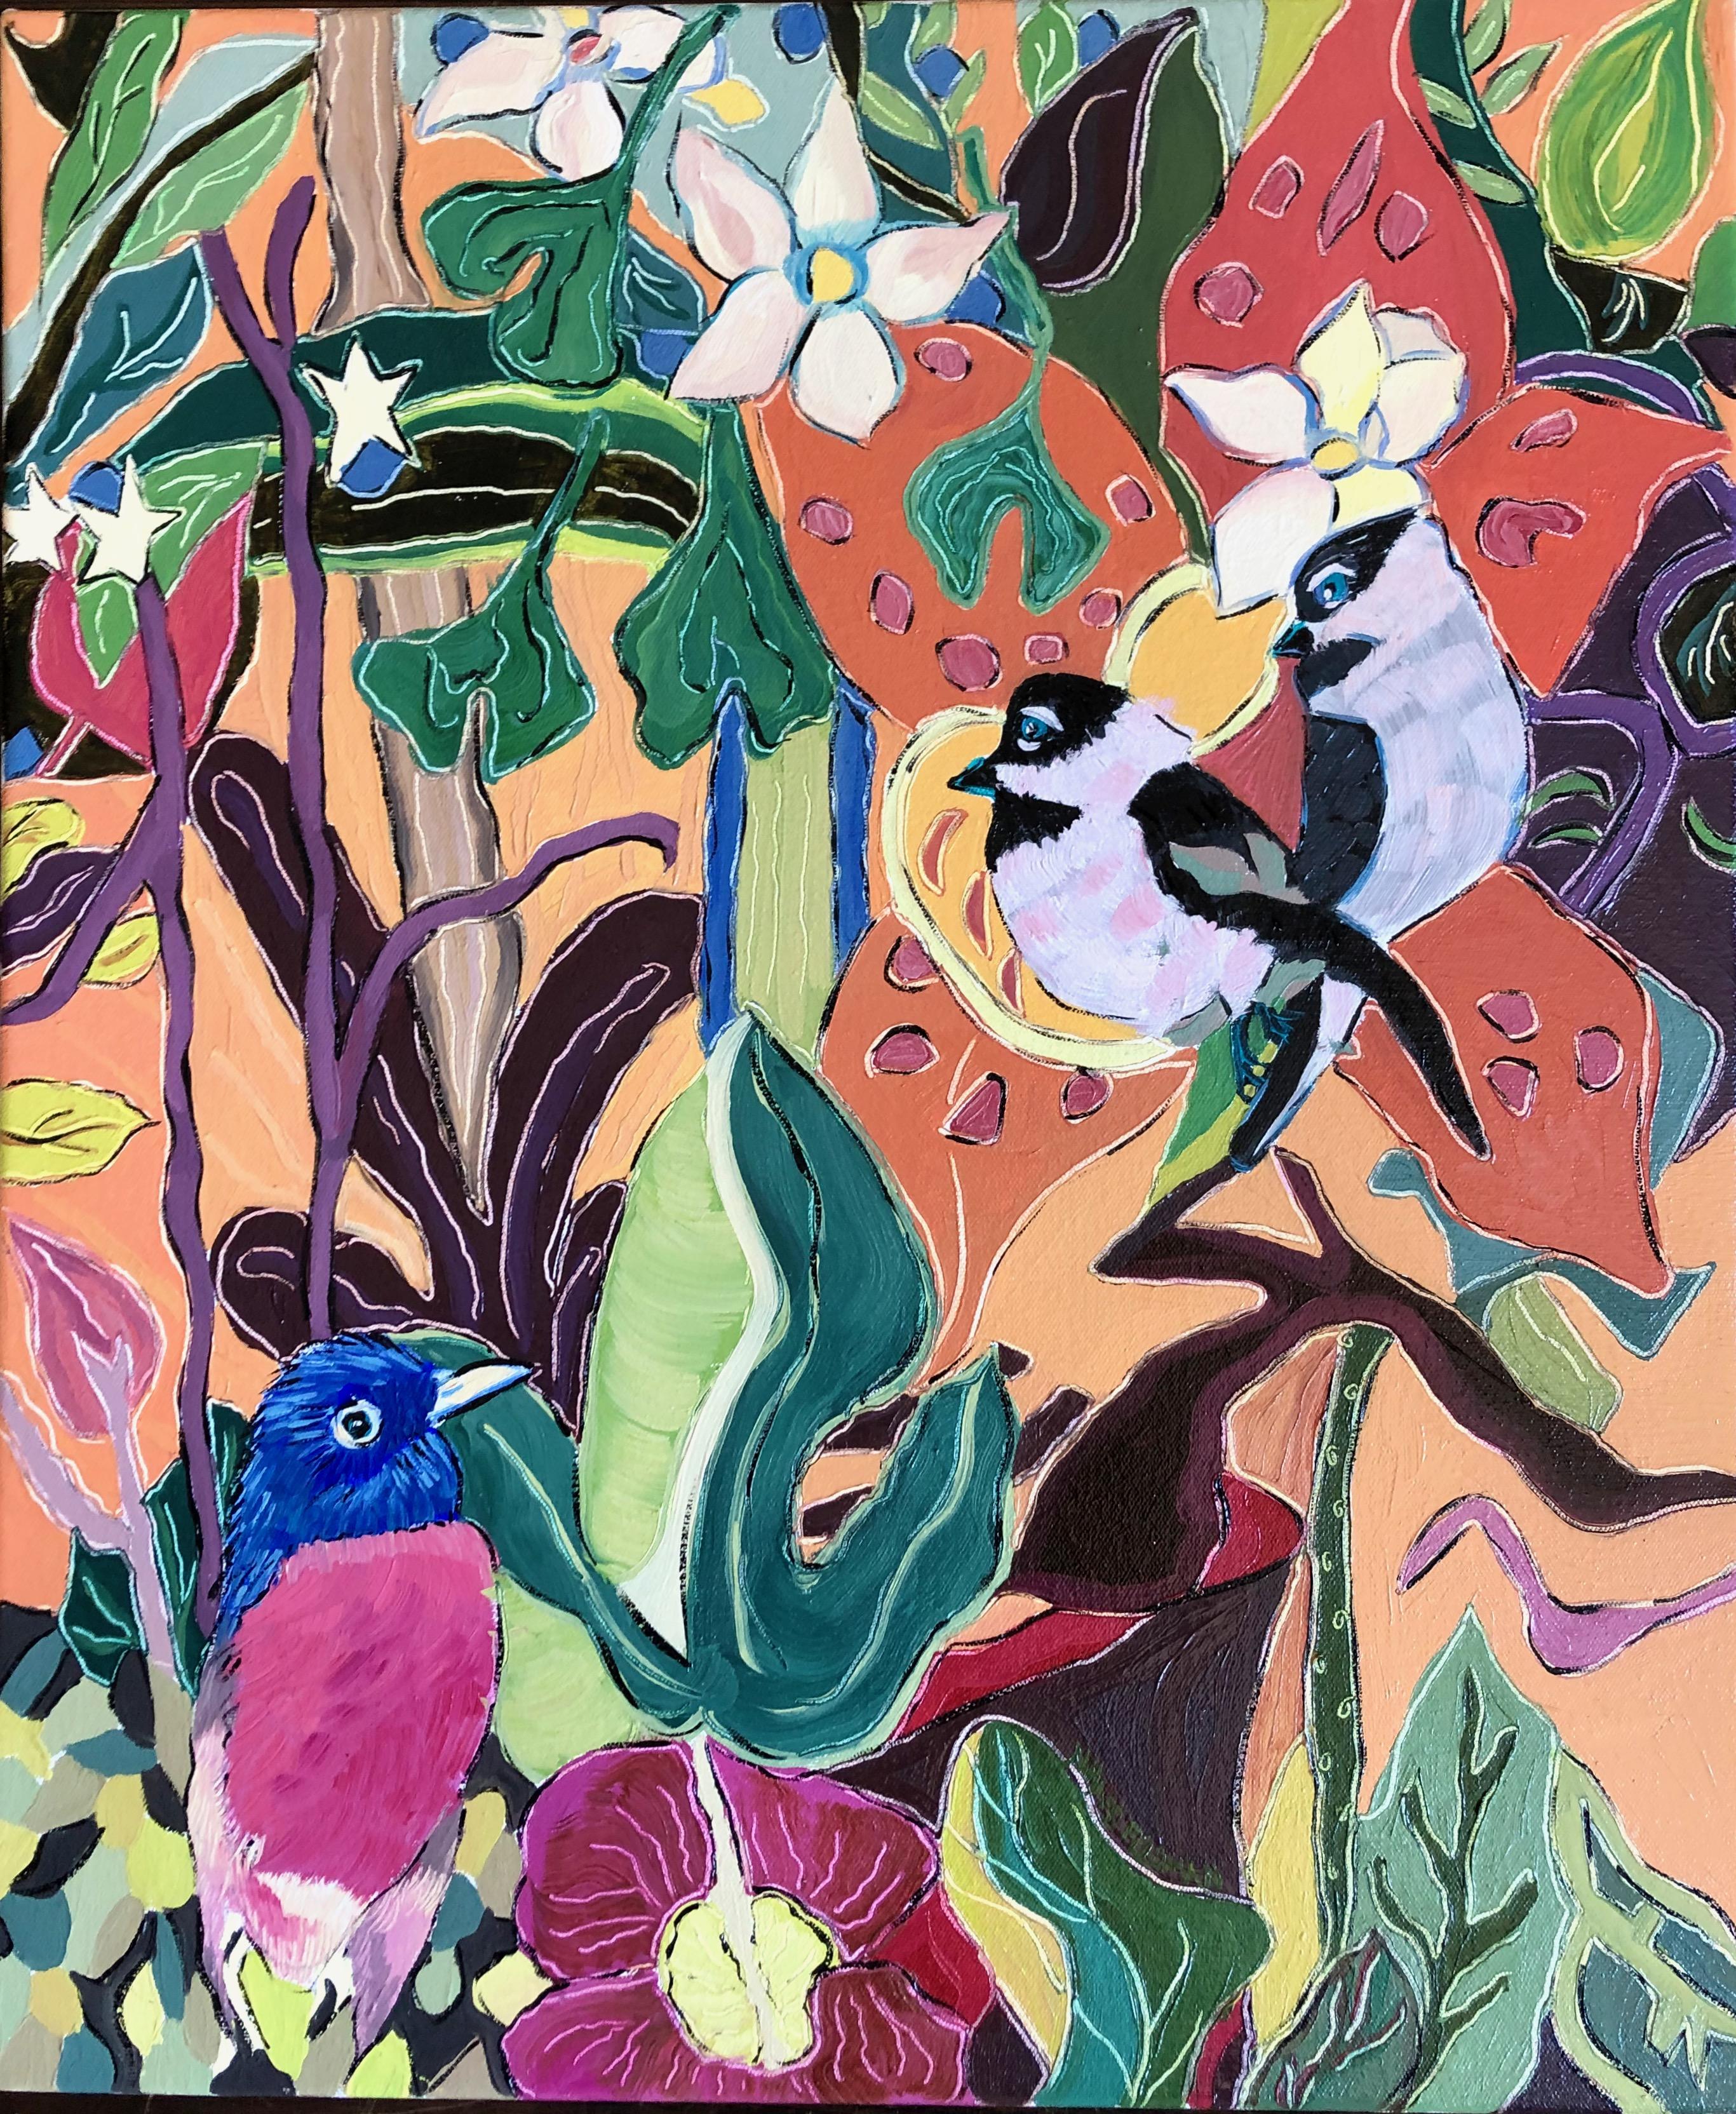 "Two's Company", birds, flowers, jungle, greens, reds, blues, gold, oil painting - Painting by Nan Hass Feldman